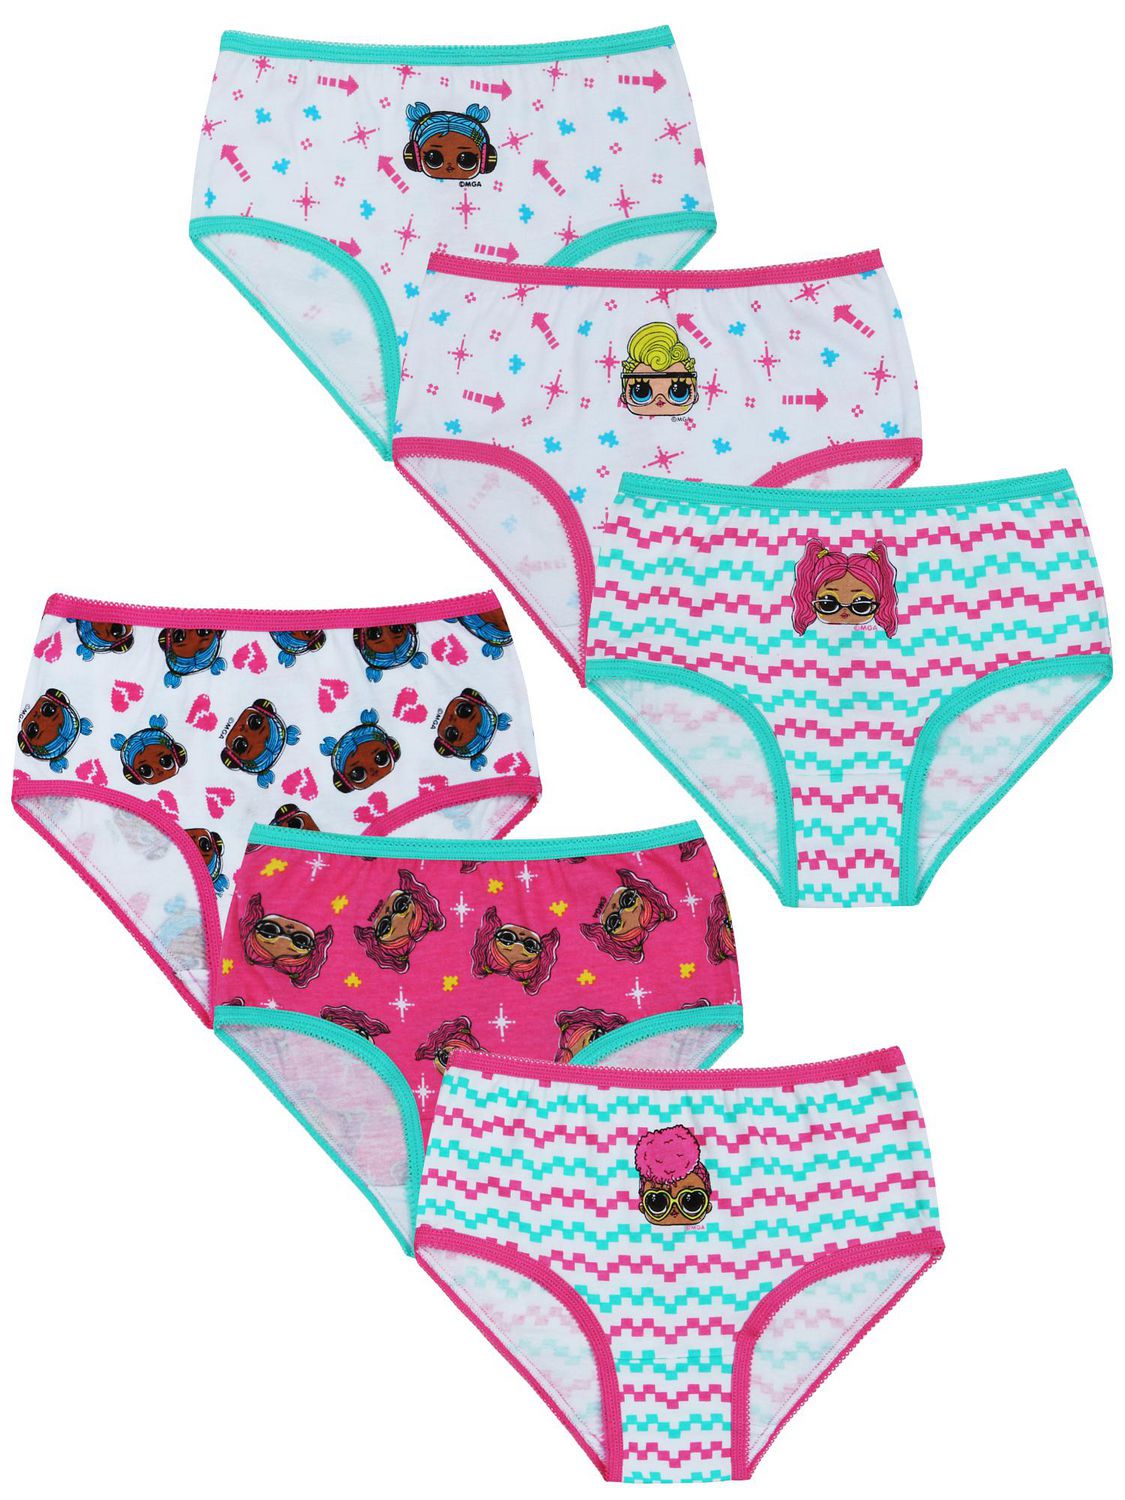 LOL Surprise! Girls' 100% Cotton Underwear 7-Pack Sizes 2/3t, 4t, 4, 6 and 8